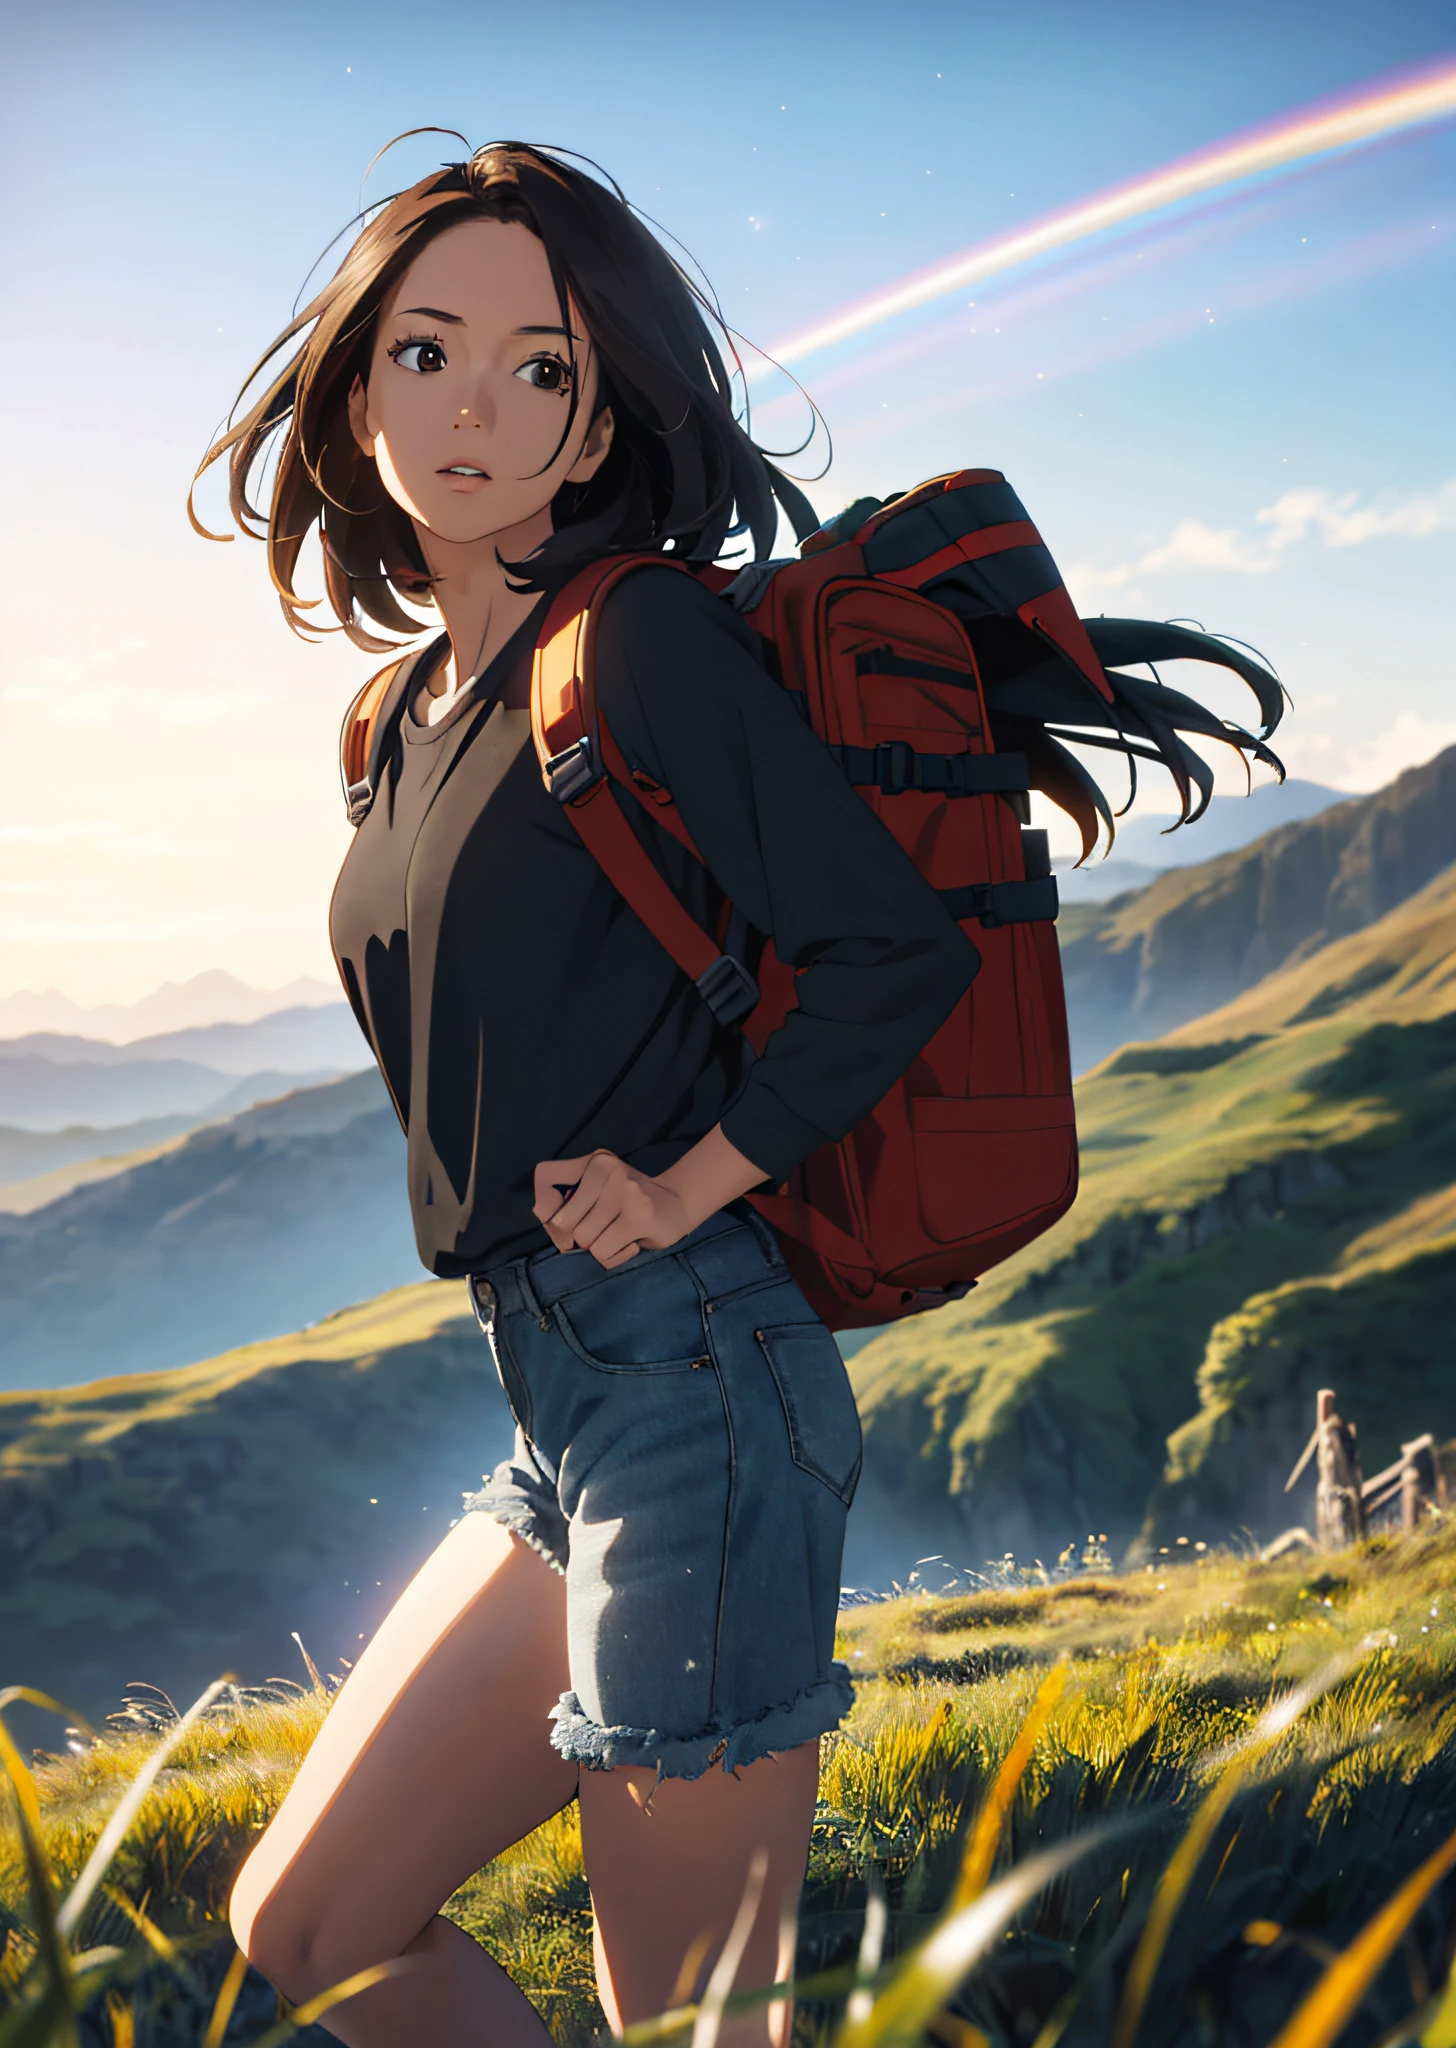 (beautiful and magnificent skyline, majestic sky), (extremely tense and dramatic pictures, moving visual effects), (high hanging Polaris, colorful natural light), (1girl), (long-sleeved top, denim shorts, carrying a backpack), (dynamic pose:1.3, black eyes, black hime-cut hair, sparkling girl)[:0.8], (large grassland), (oncoming breeze), (brown hair and background Coordination effect: 1.2), (close shot, long shot mix and match)[::0.9]